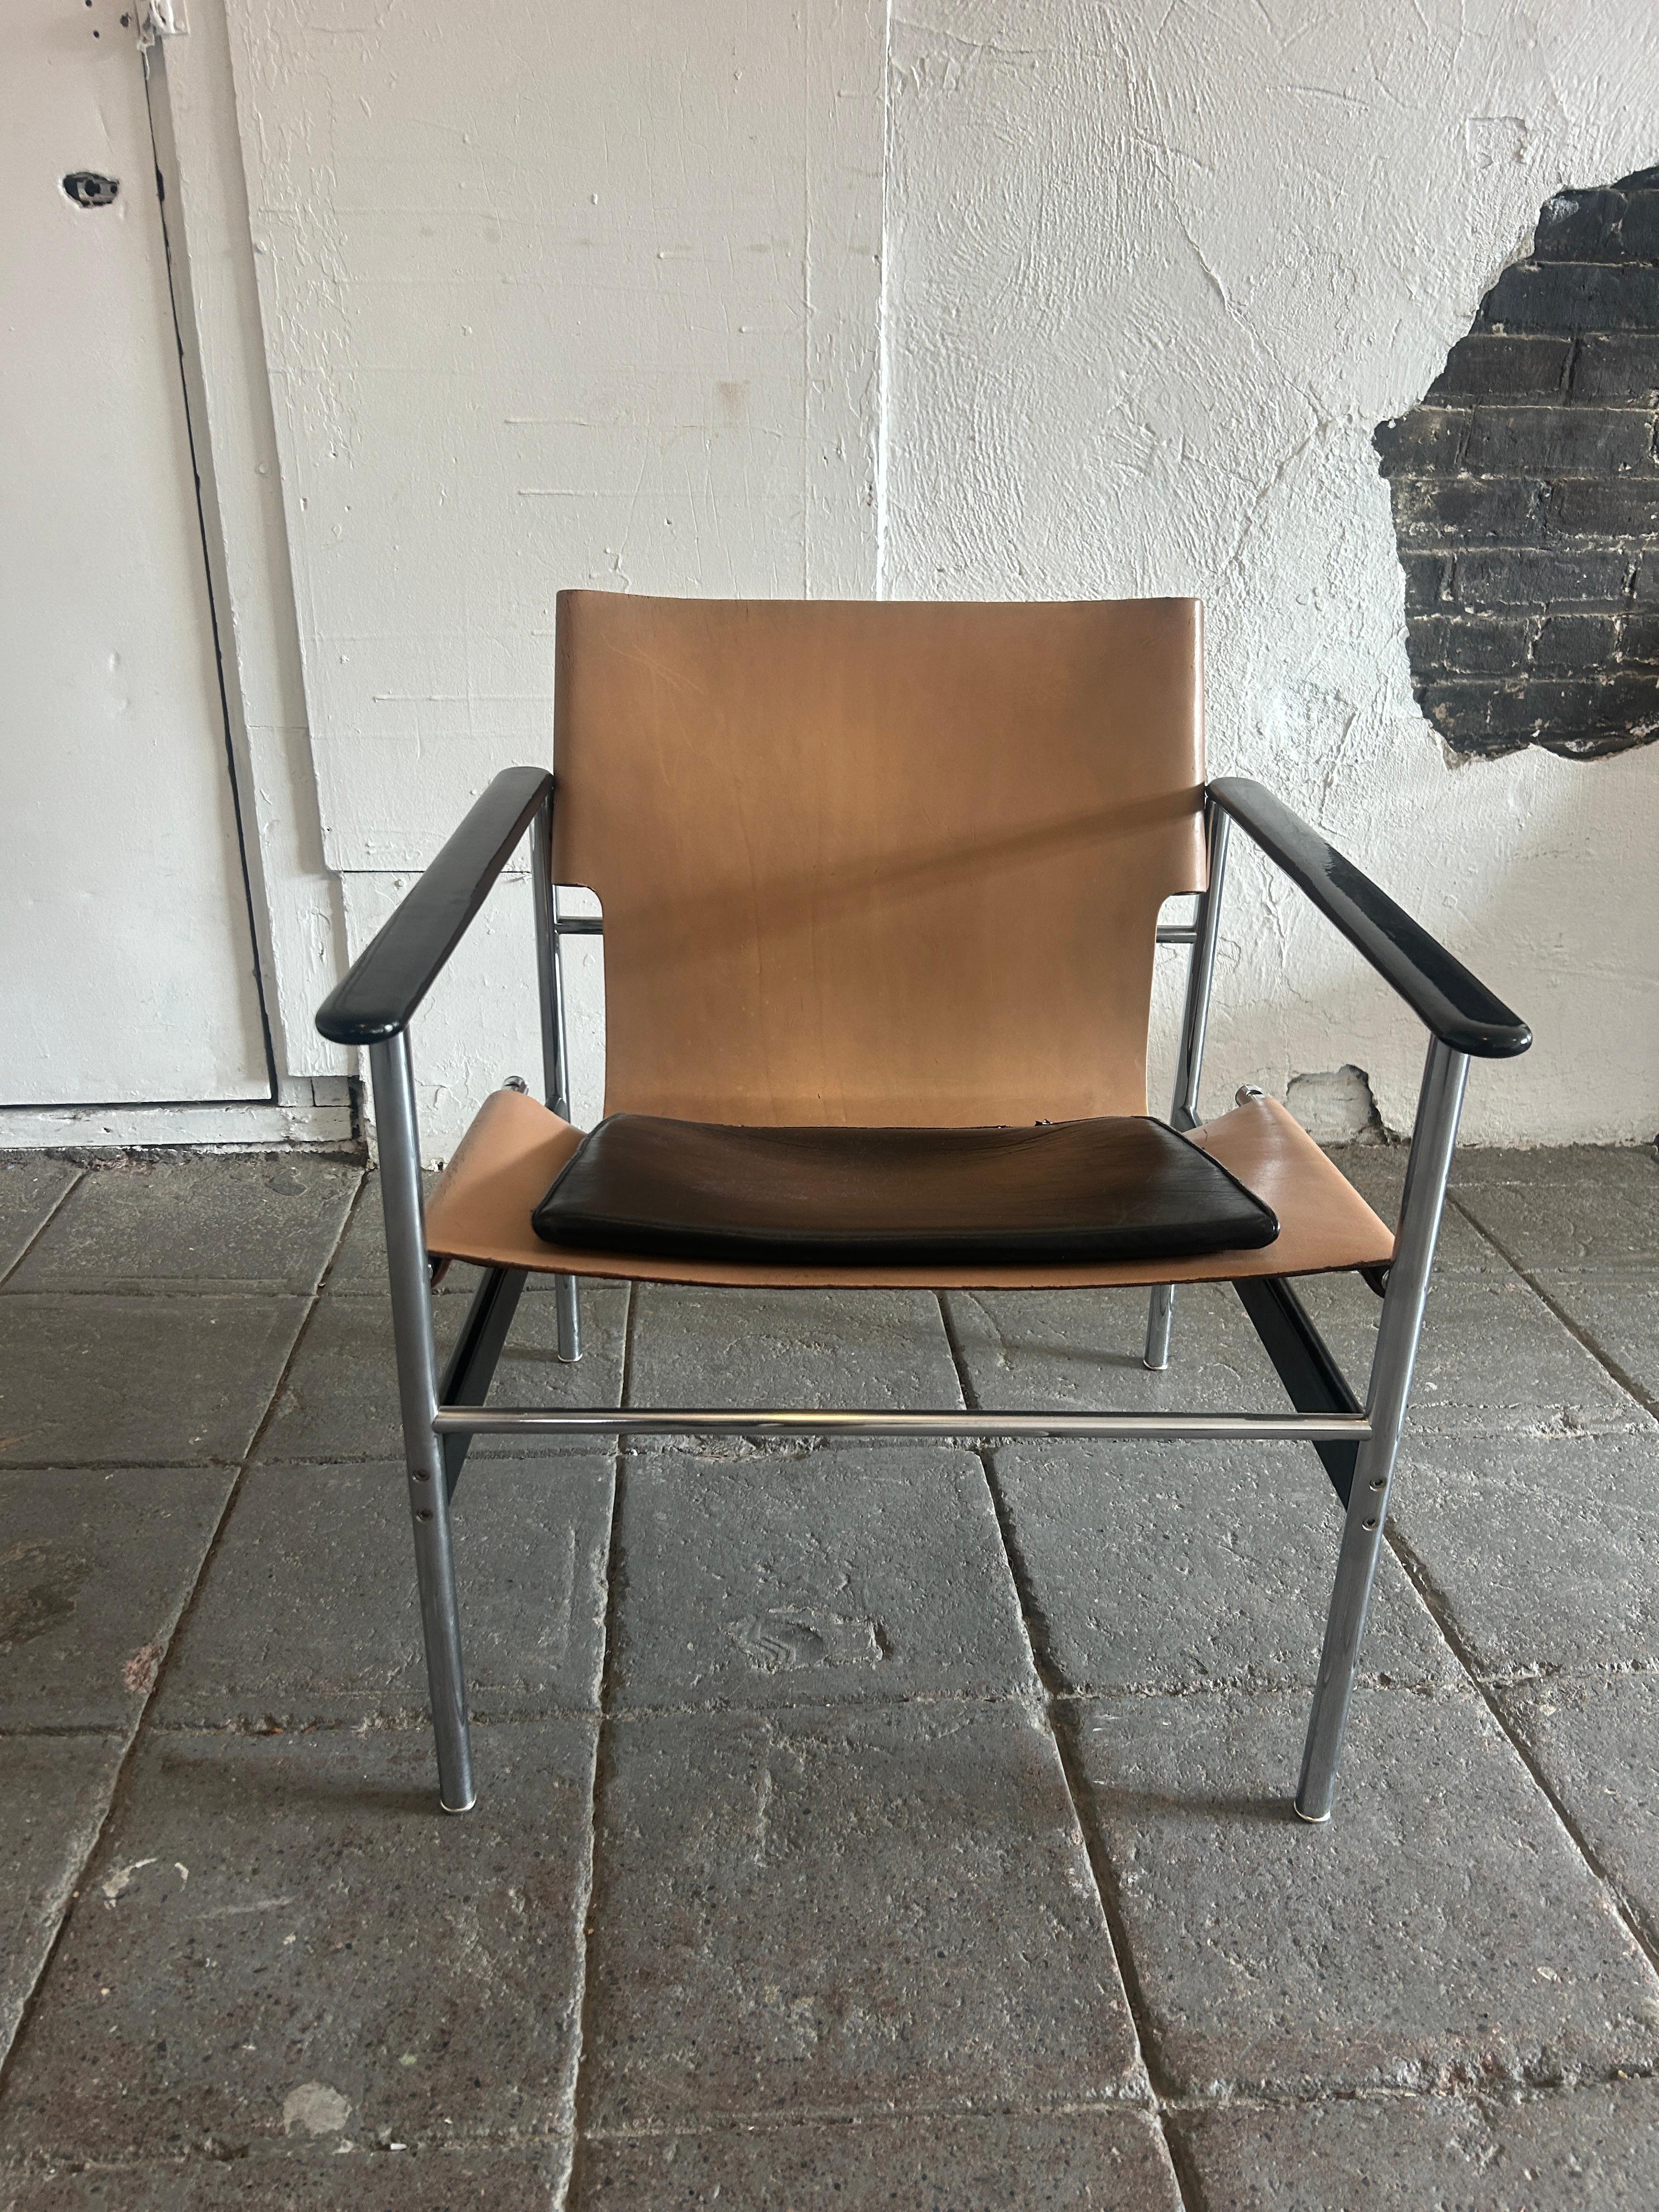 Mid century vintage leather sling lounge chair ‘657’ by Charles pollock. Light tan thick hide leather sling with black cushion. Labeled knoll. Good vintage condition circa 1960. Located in Brooklyn NYC.


Height: 28”
Width: 25”
Depth: 25”